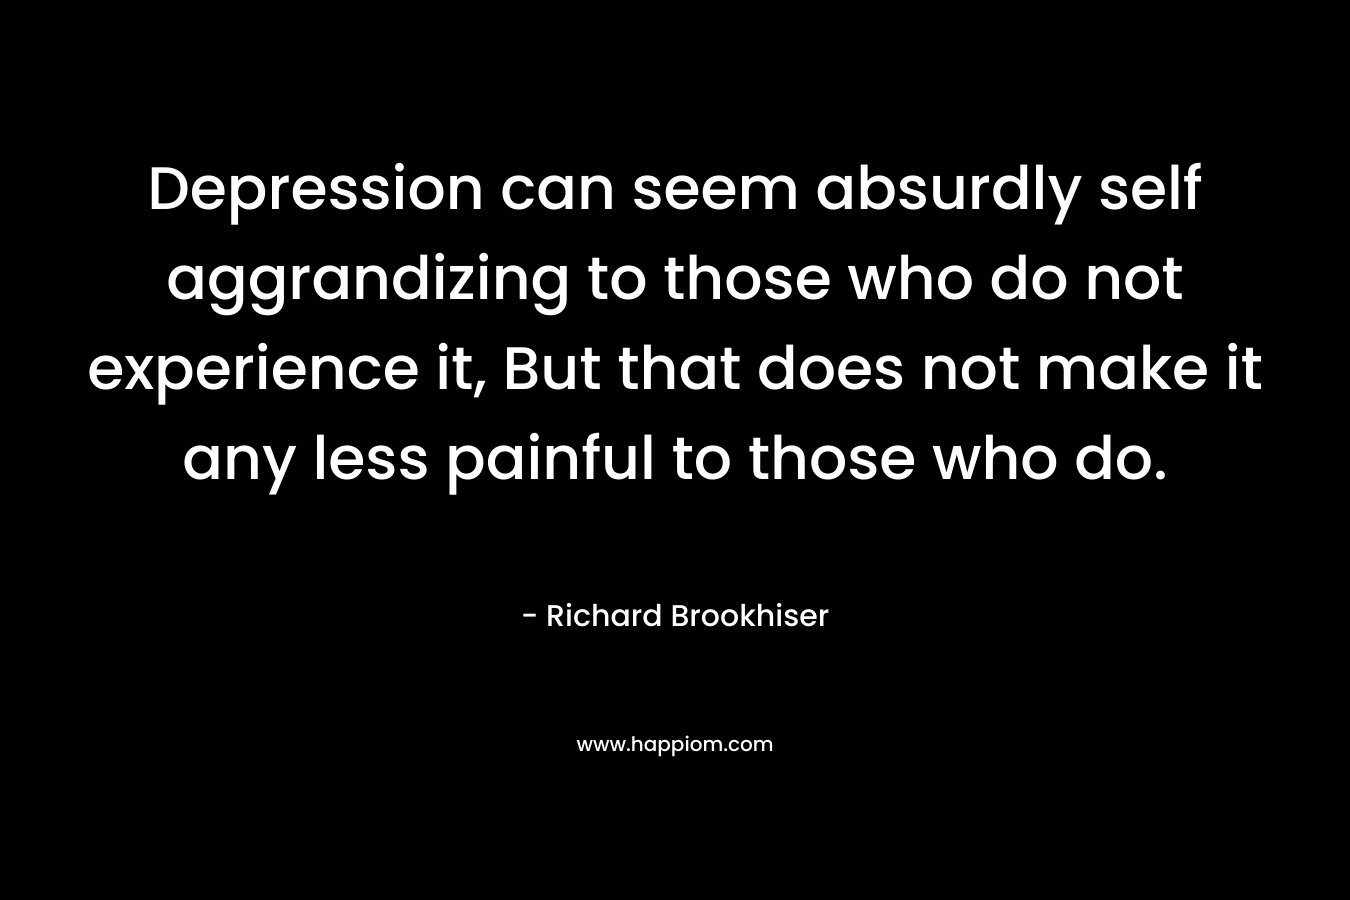 Depression can seem absurdly self aggrandizing to those who do not experience it, But that does not make it any less painful to those who do. – Richard Brookhiser